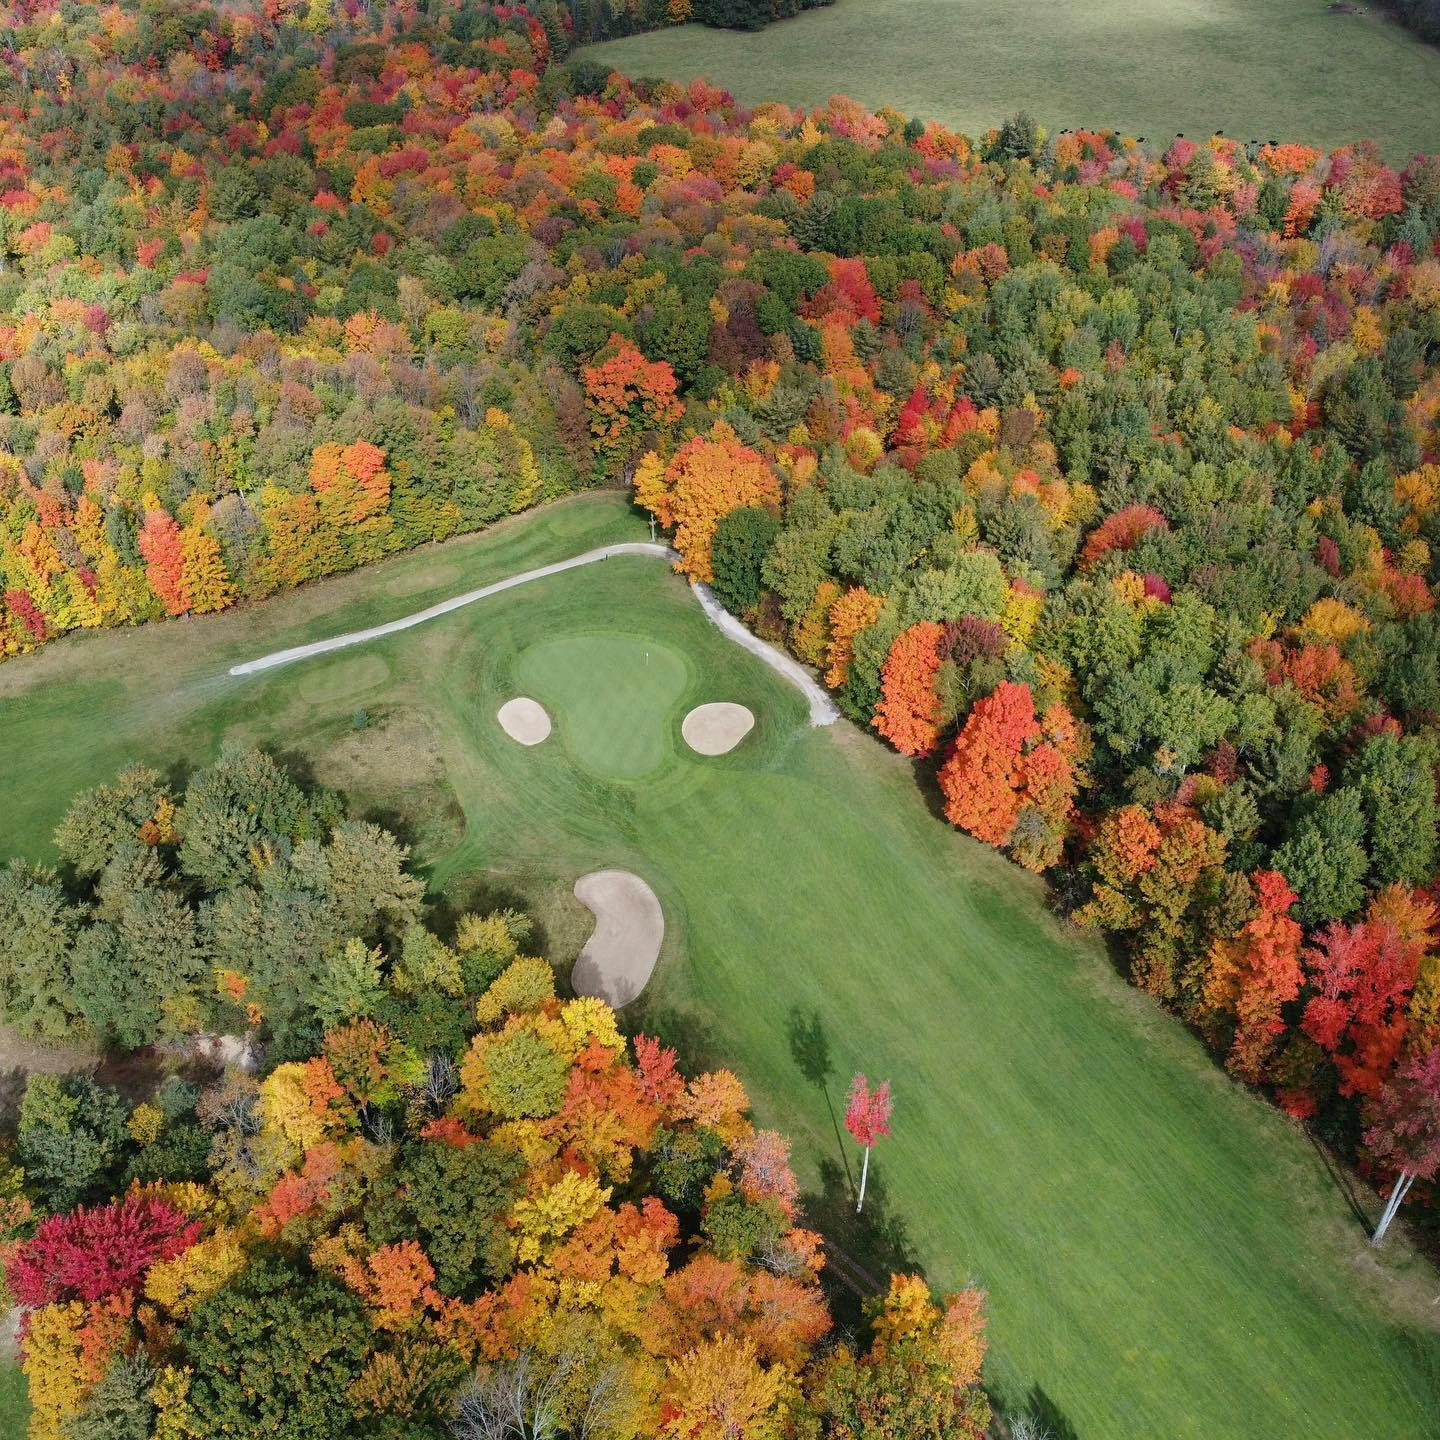 The colours are fully out for thanksgiving weekend 👌 #FallGolf